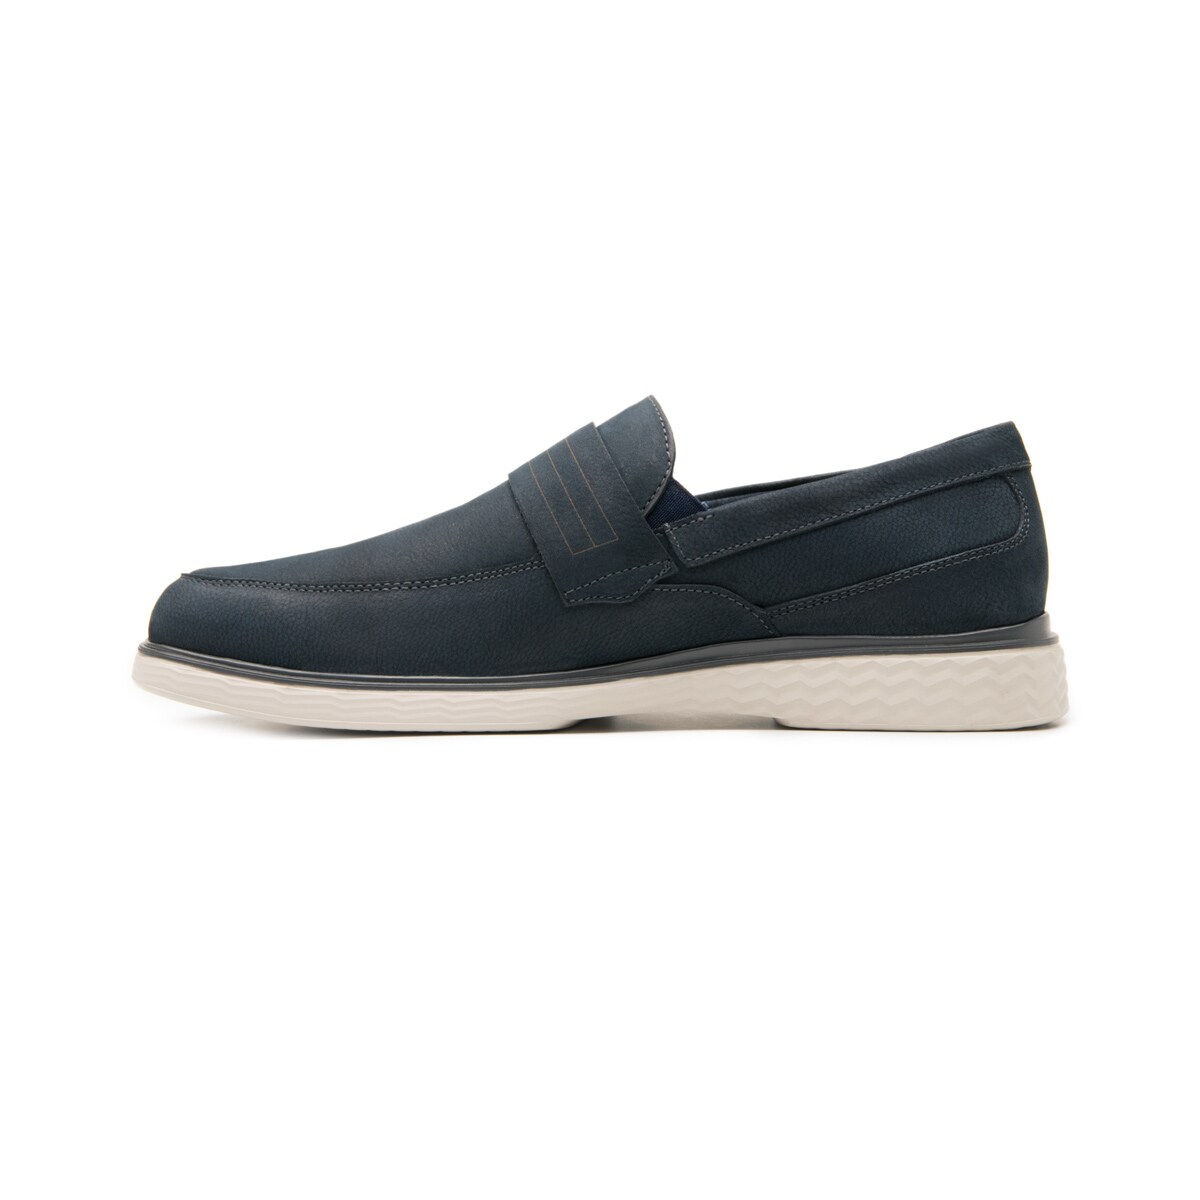 Sperry Hombre, Mainsail Slip-On